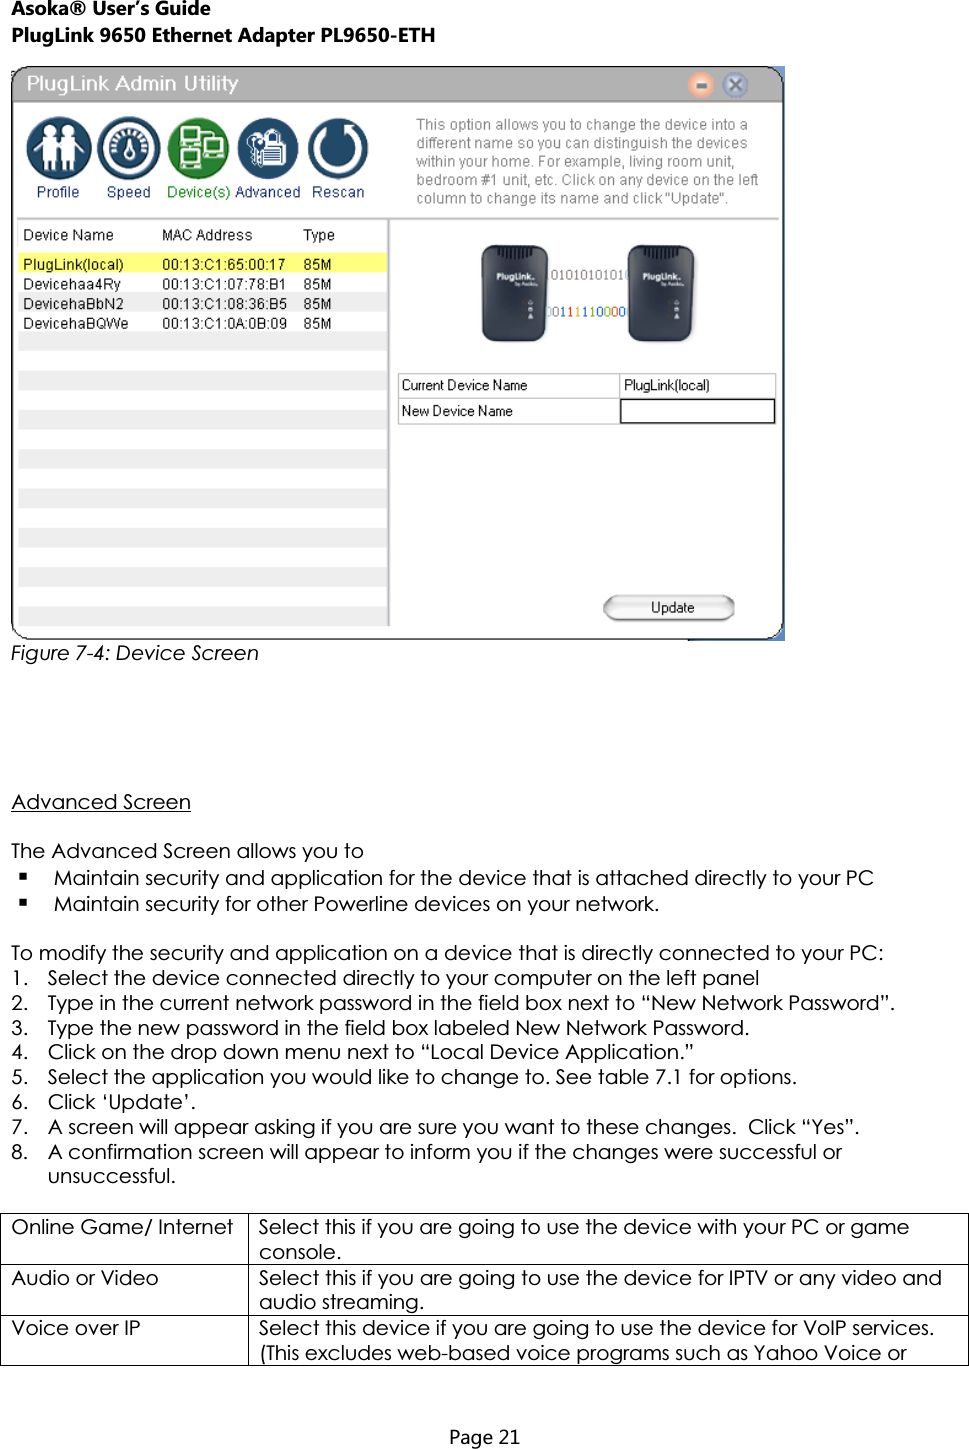 Asoka® User’s Guide PlugLink 9650 Ethernet Adapter PL9650-ETH  Page 21  Figure 7-4: Device Screen Advanced ScreenThe Advanced Screen allows you to  Maintain security and application for the device that is attached directly to your PC  Maintain security for other Powerline devices on your network. To modify the security and application on a device that is directly connected to your PC: 1. Select the device connected directly to your computer on the left panel 2. Type in the current network password in the field box next to “New Network Password”. 3. Type the new password in the field box labeled New Network Password. 4. Click on the drop down menu next to “Local Device Application.”  5. Select the application you would like to change to. See table 7.1 for options. 6. Click ‘Update’. 7. A screen will appear asking if you are sure you want to these changes.  Click “Yes”. 8. A confirmation screen will appear to inform you if the changes were successful or unsuccessful. Online Game/ Internet Select this if you are going to use the device with your PC or game console. Audio or Video  Select this if you are going to use the device for IPTV or any video and audio streaming. Voice over IP  Select this device if you are going to use the device for VoIP services. (This excludes web-based voice programs such as Yahoo Voice or 